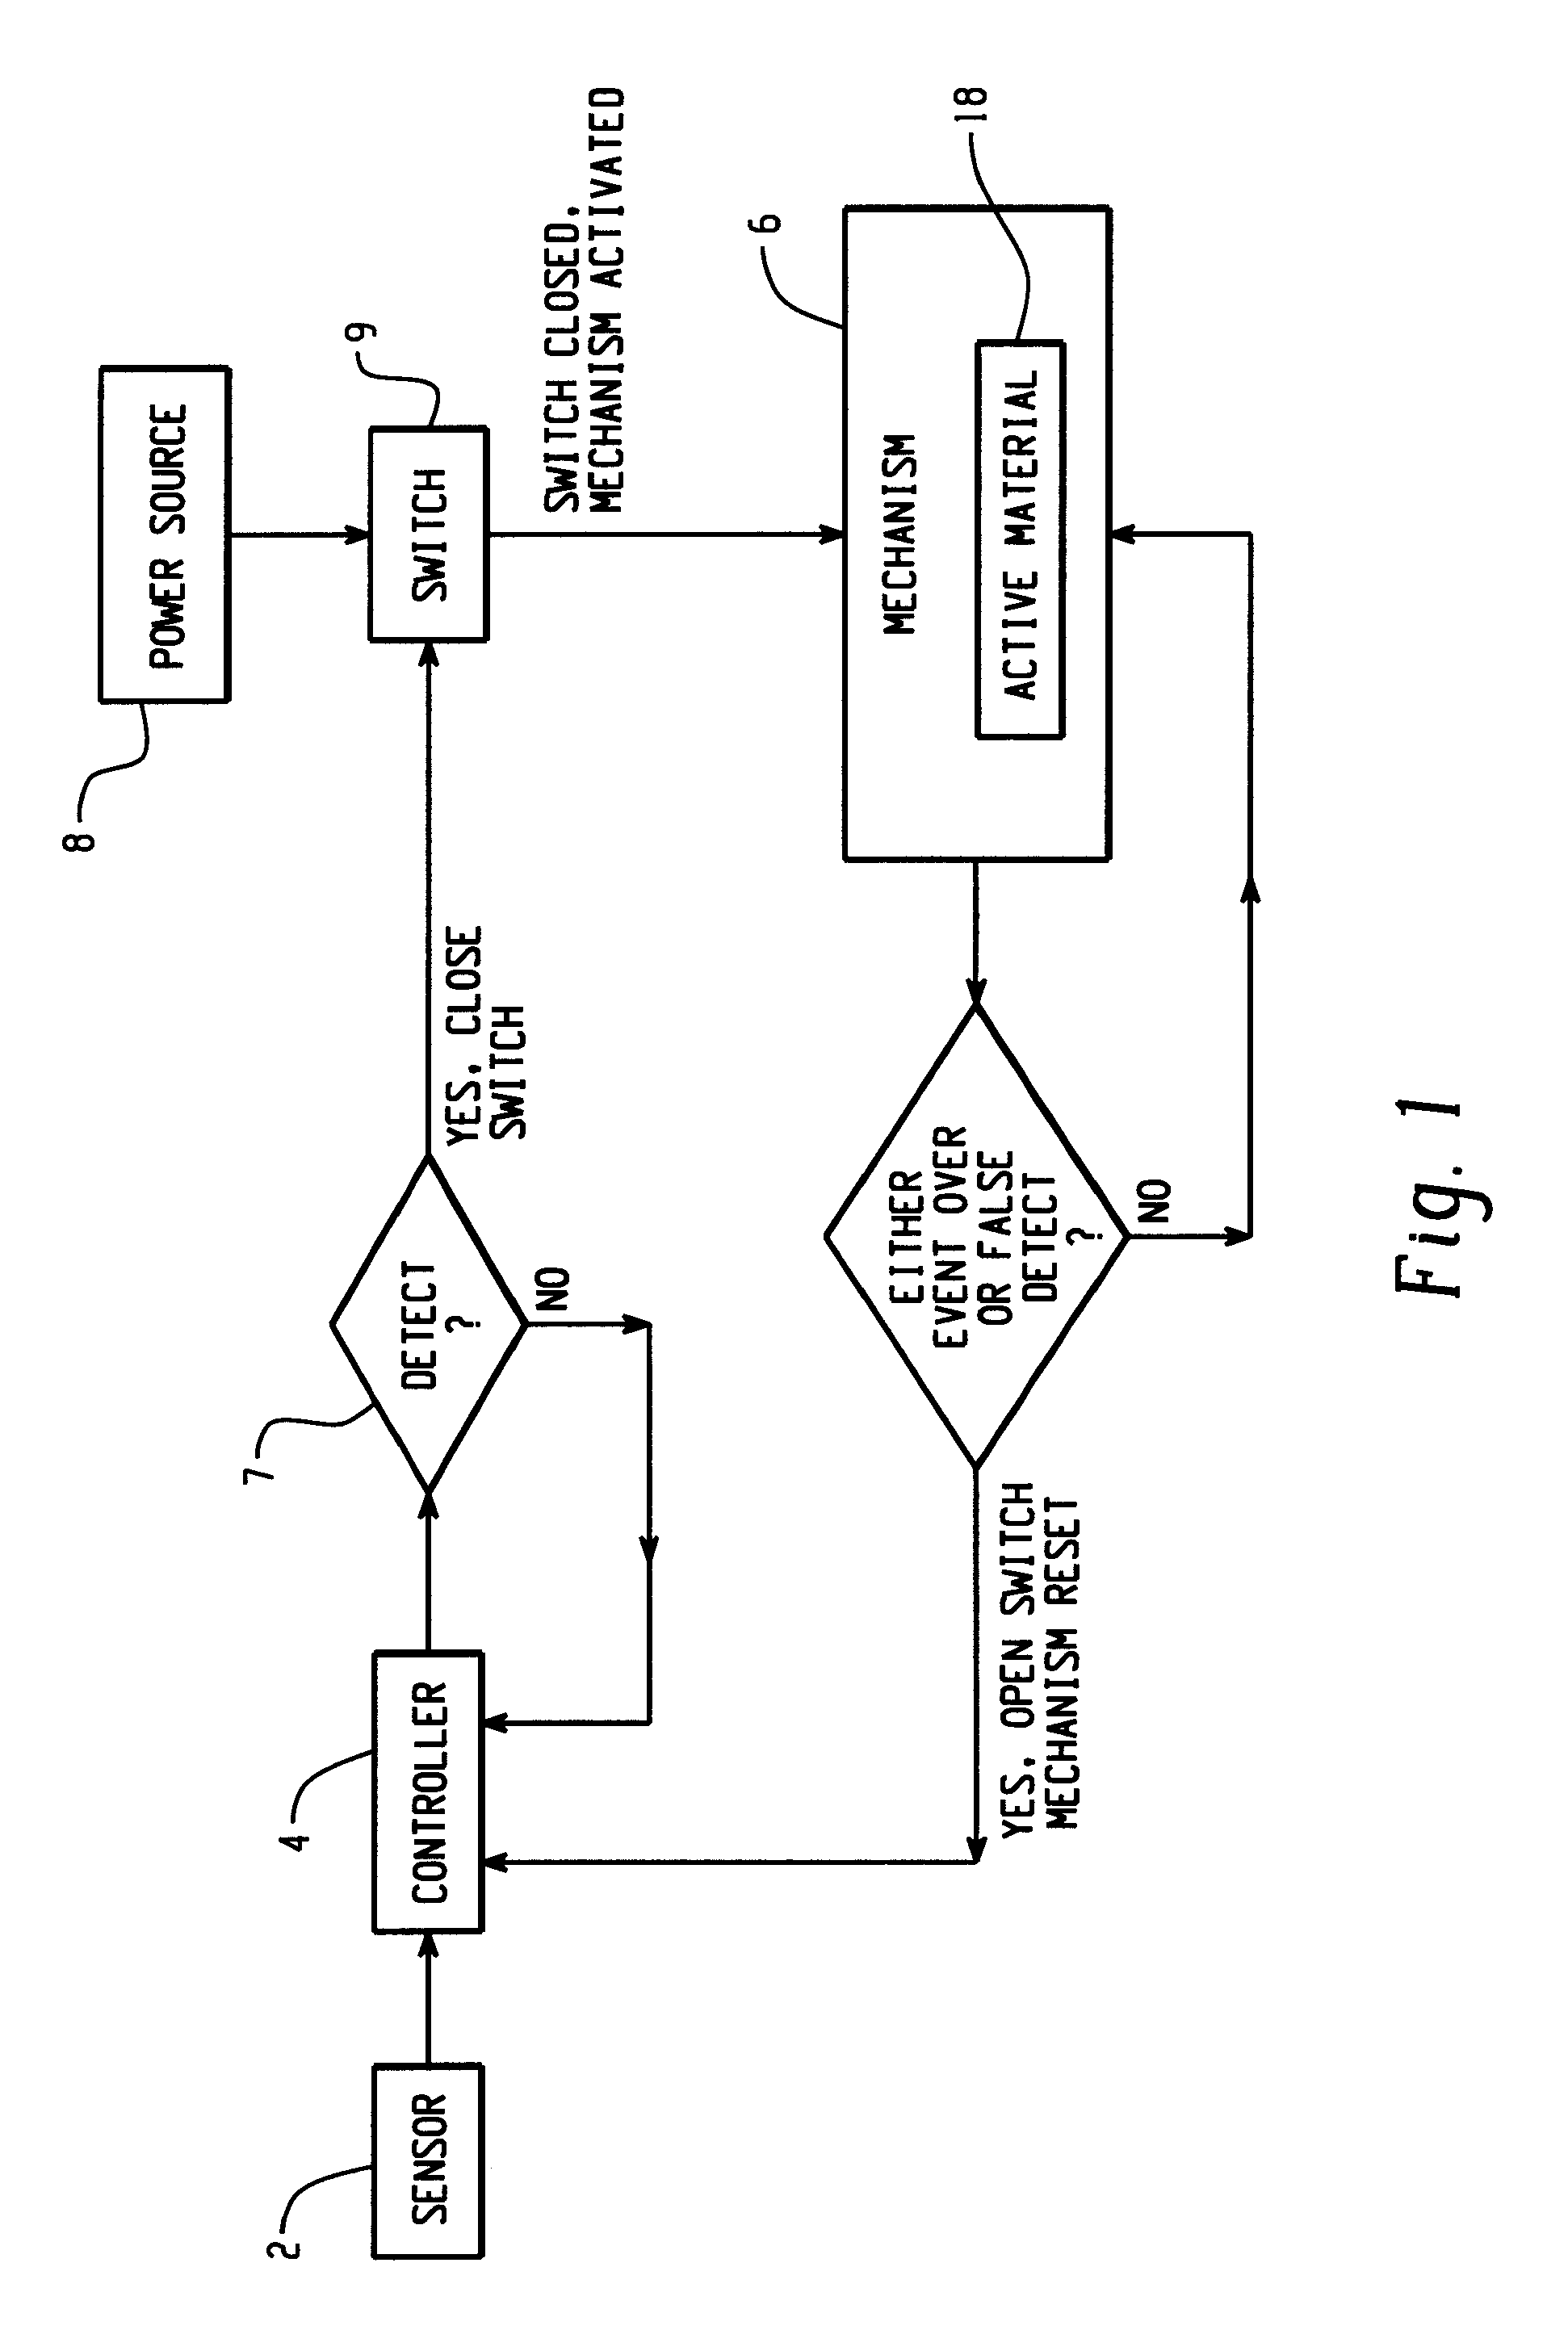 Hood lift mechanisms utilizing active materials and methods of use